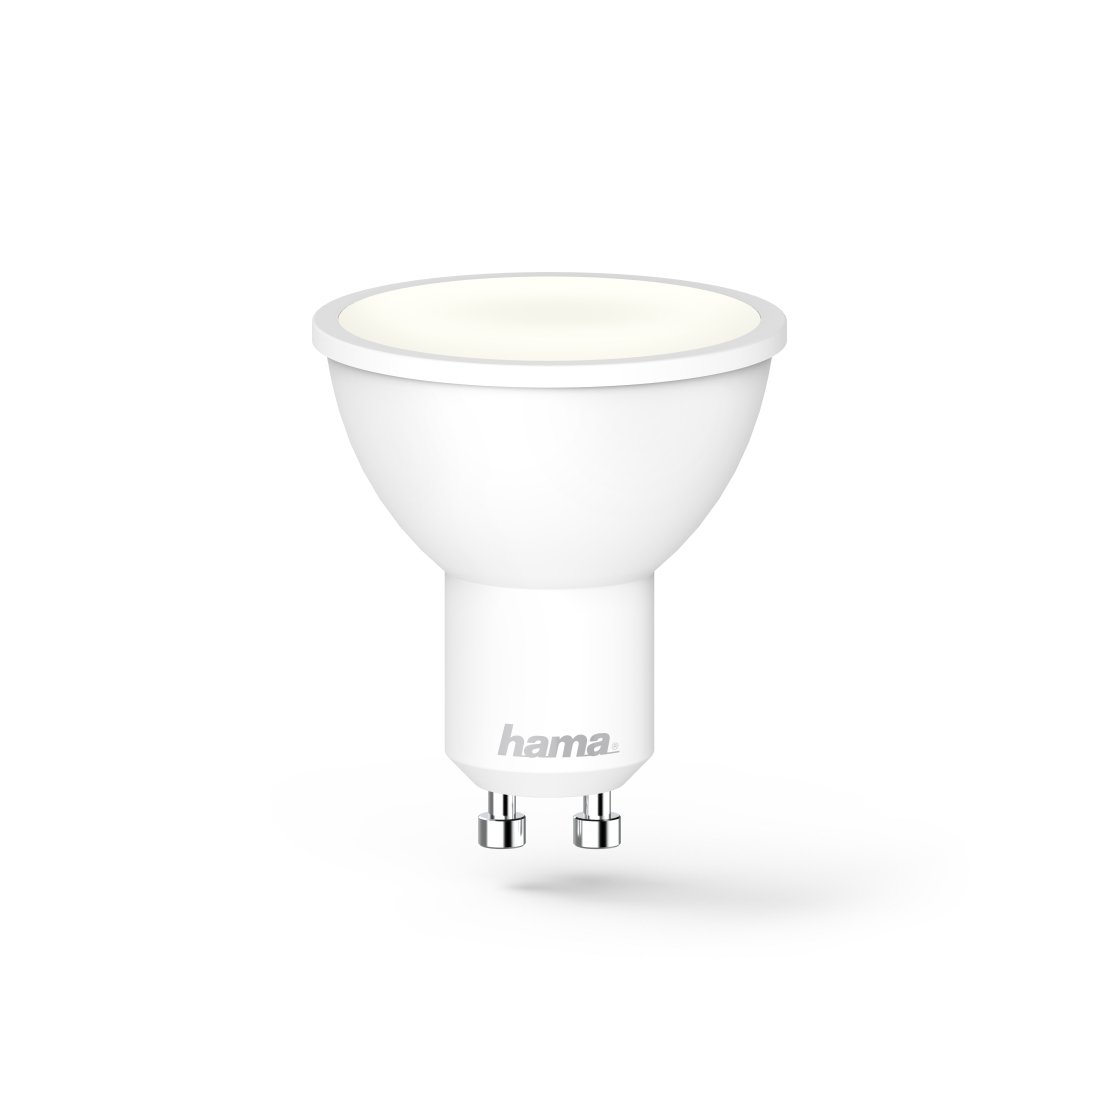 You Recently Viewed Hama 00176585 WLAN LED Lamp, GU10, 5.5 W, Dimmable, Refl., for Voice / App Control, white Image